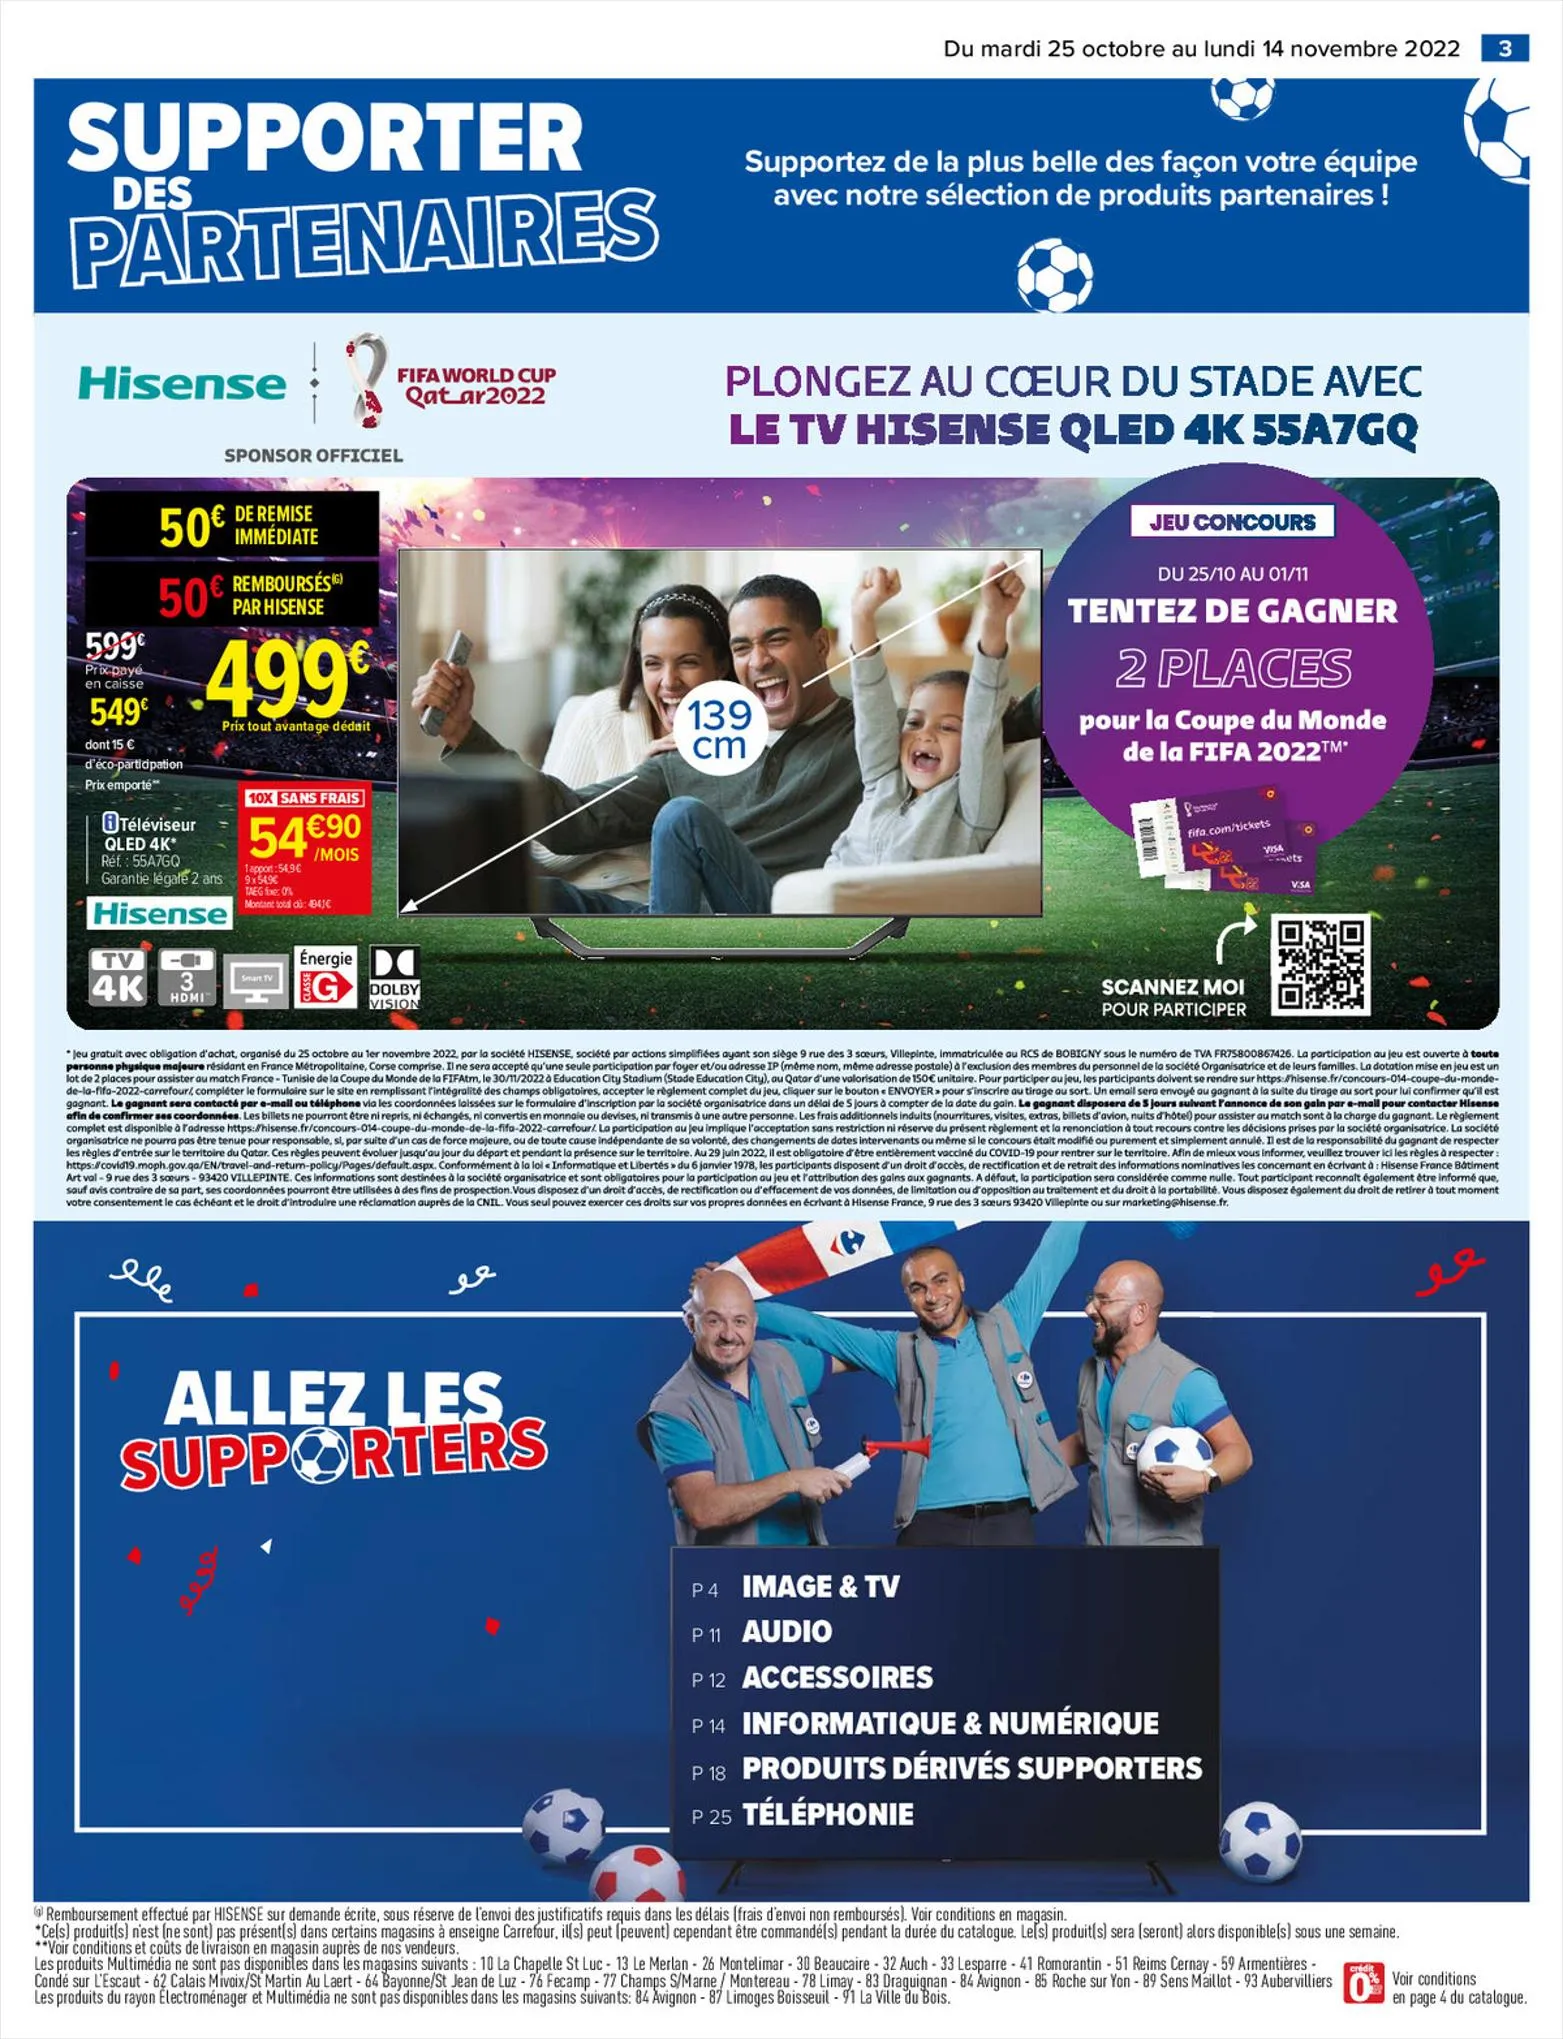 Catalogue Carrefour supporter des supporters, page 00003